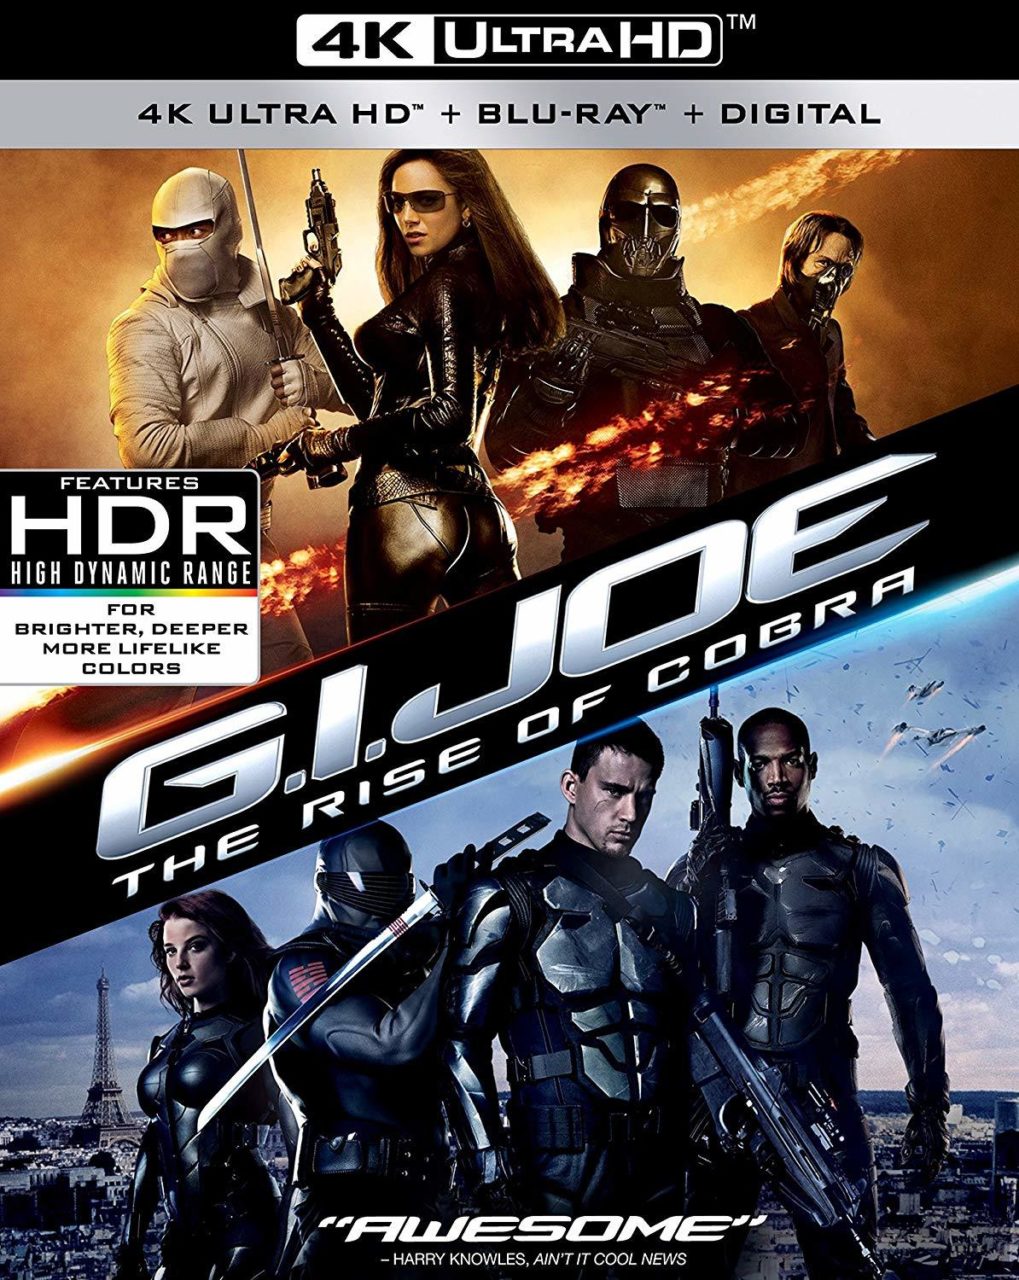 G.I. Joe: The Rise Of Cobra 4K Ultra HD Combo Pack cover (Paramount Home Entertainment)